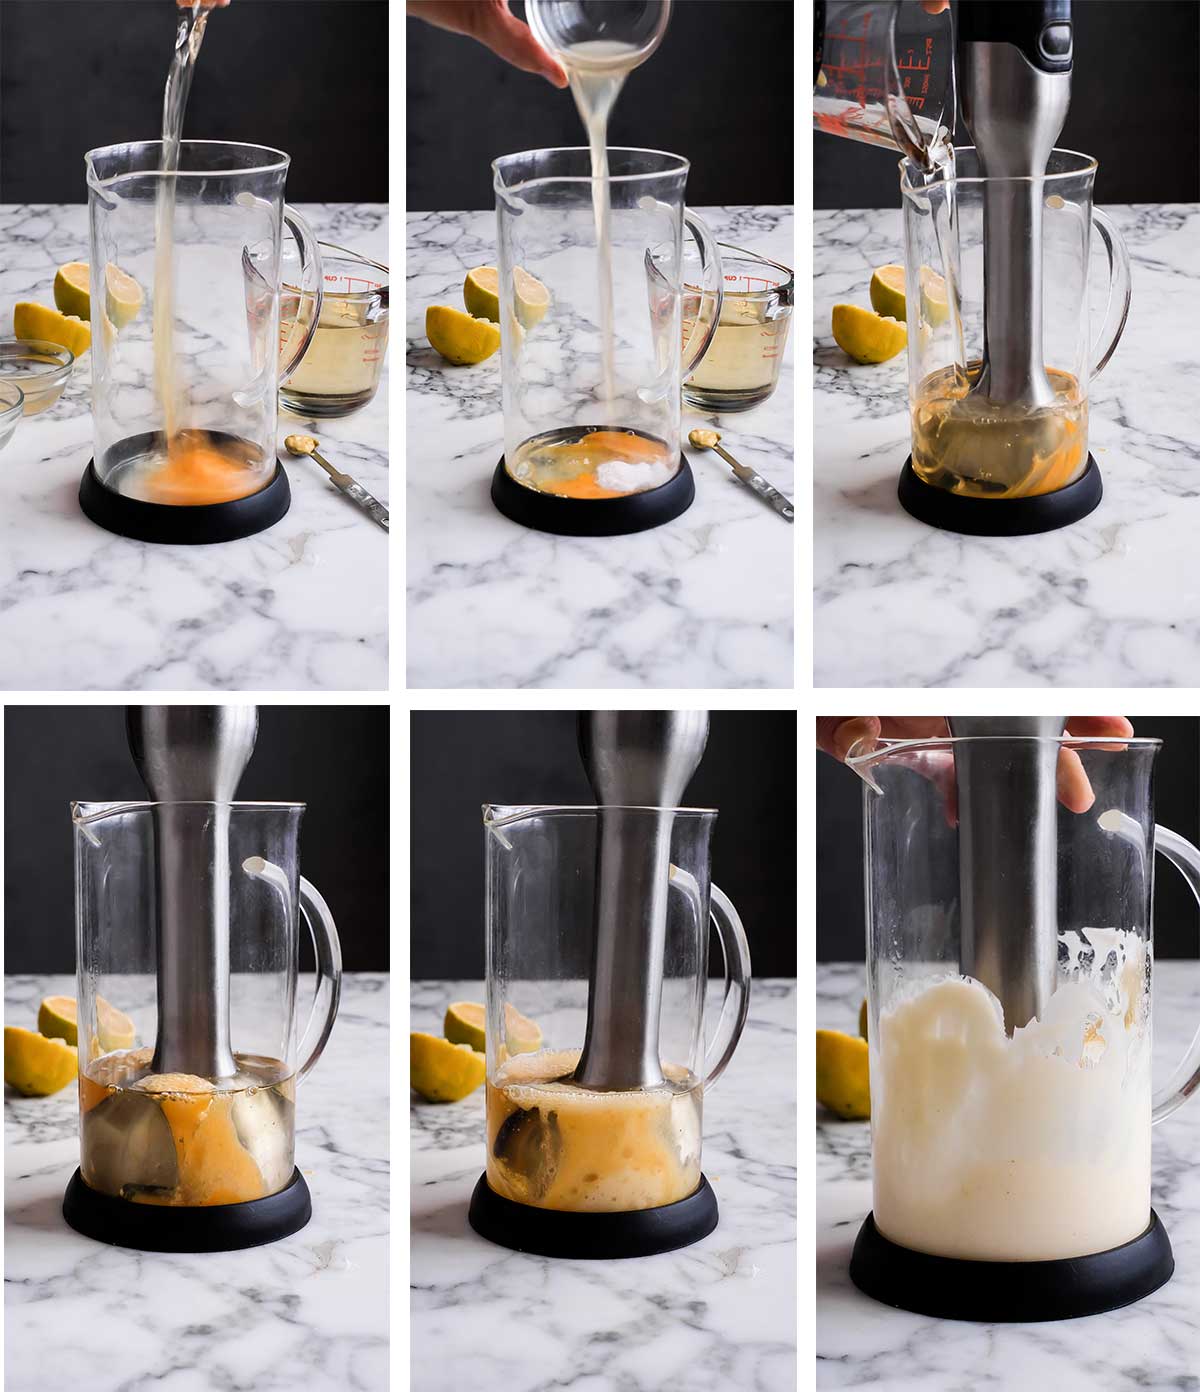 Images that show how to make mayonnaise with a stick blender in a jug